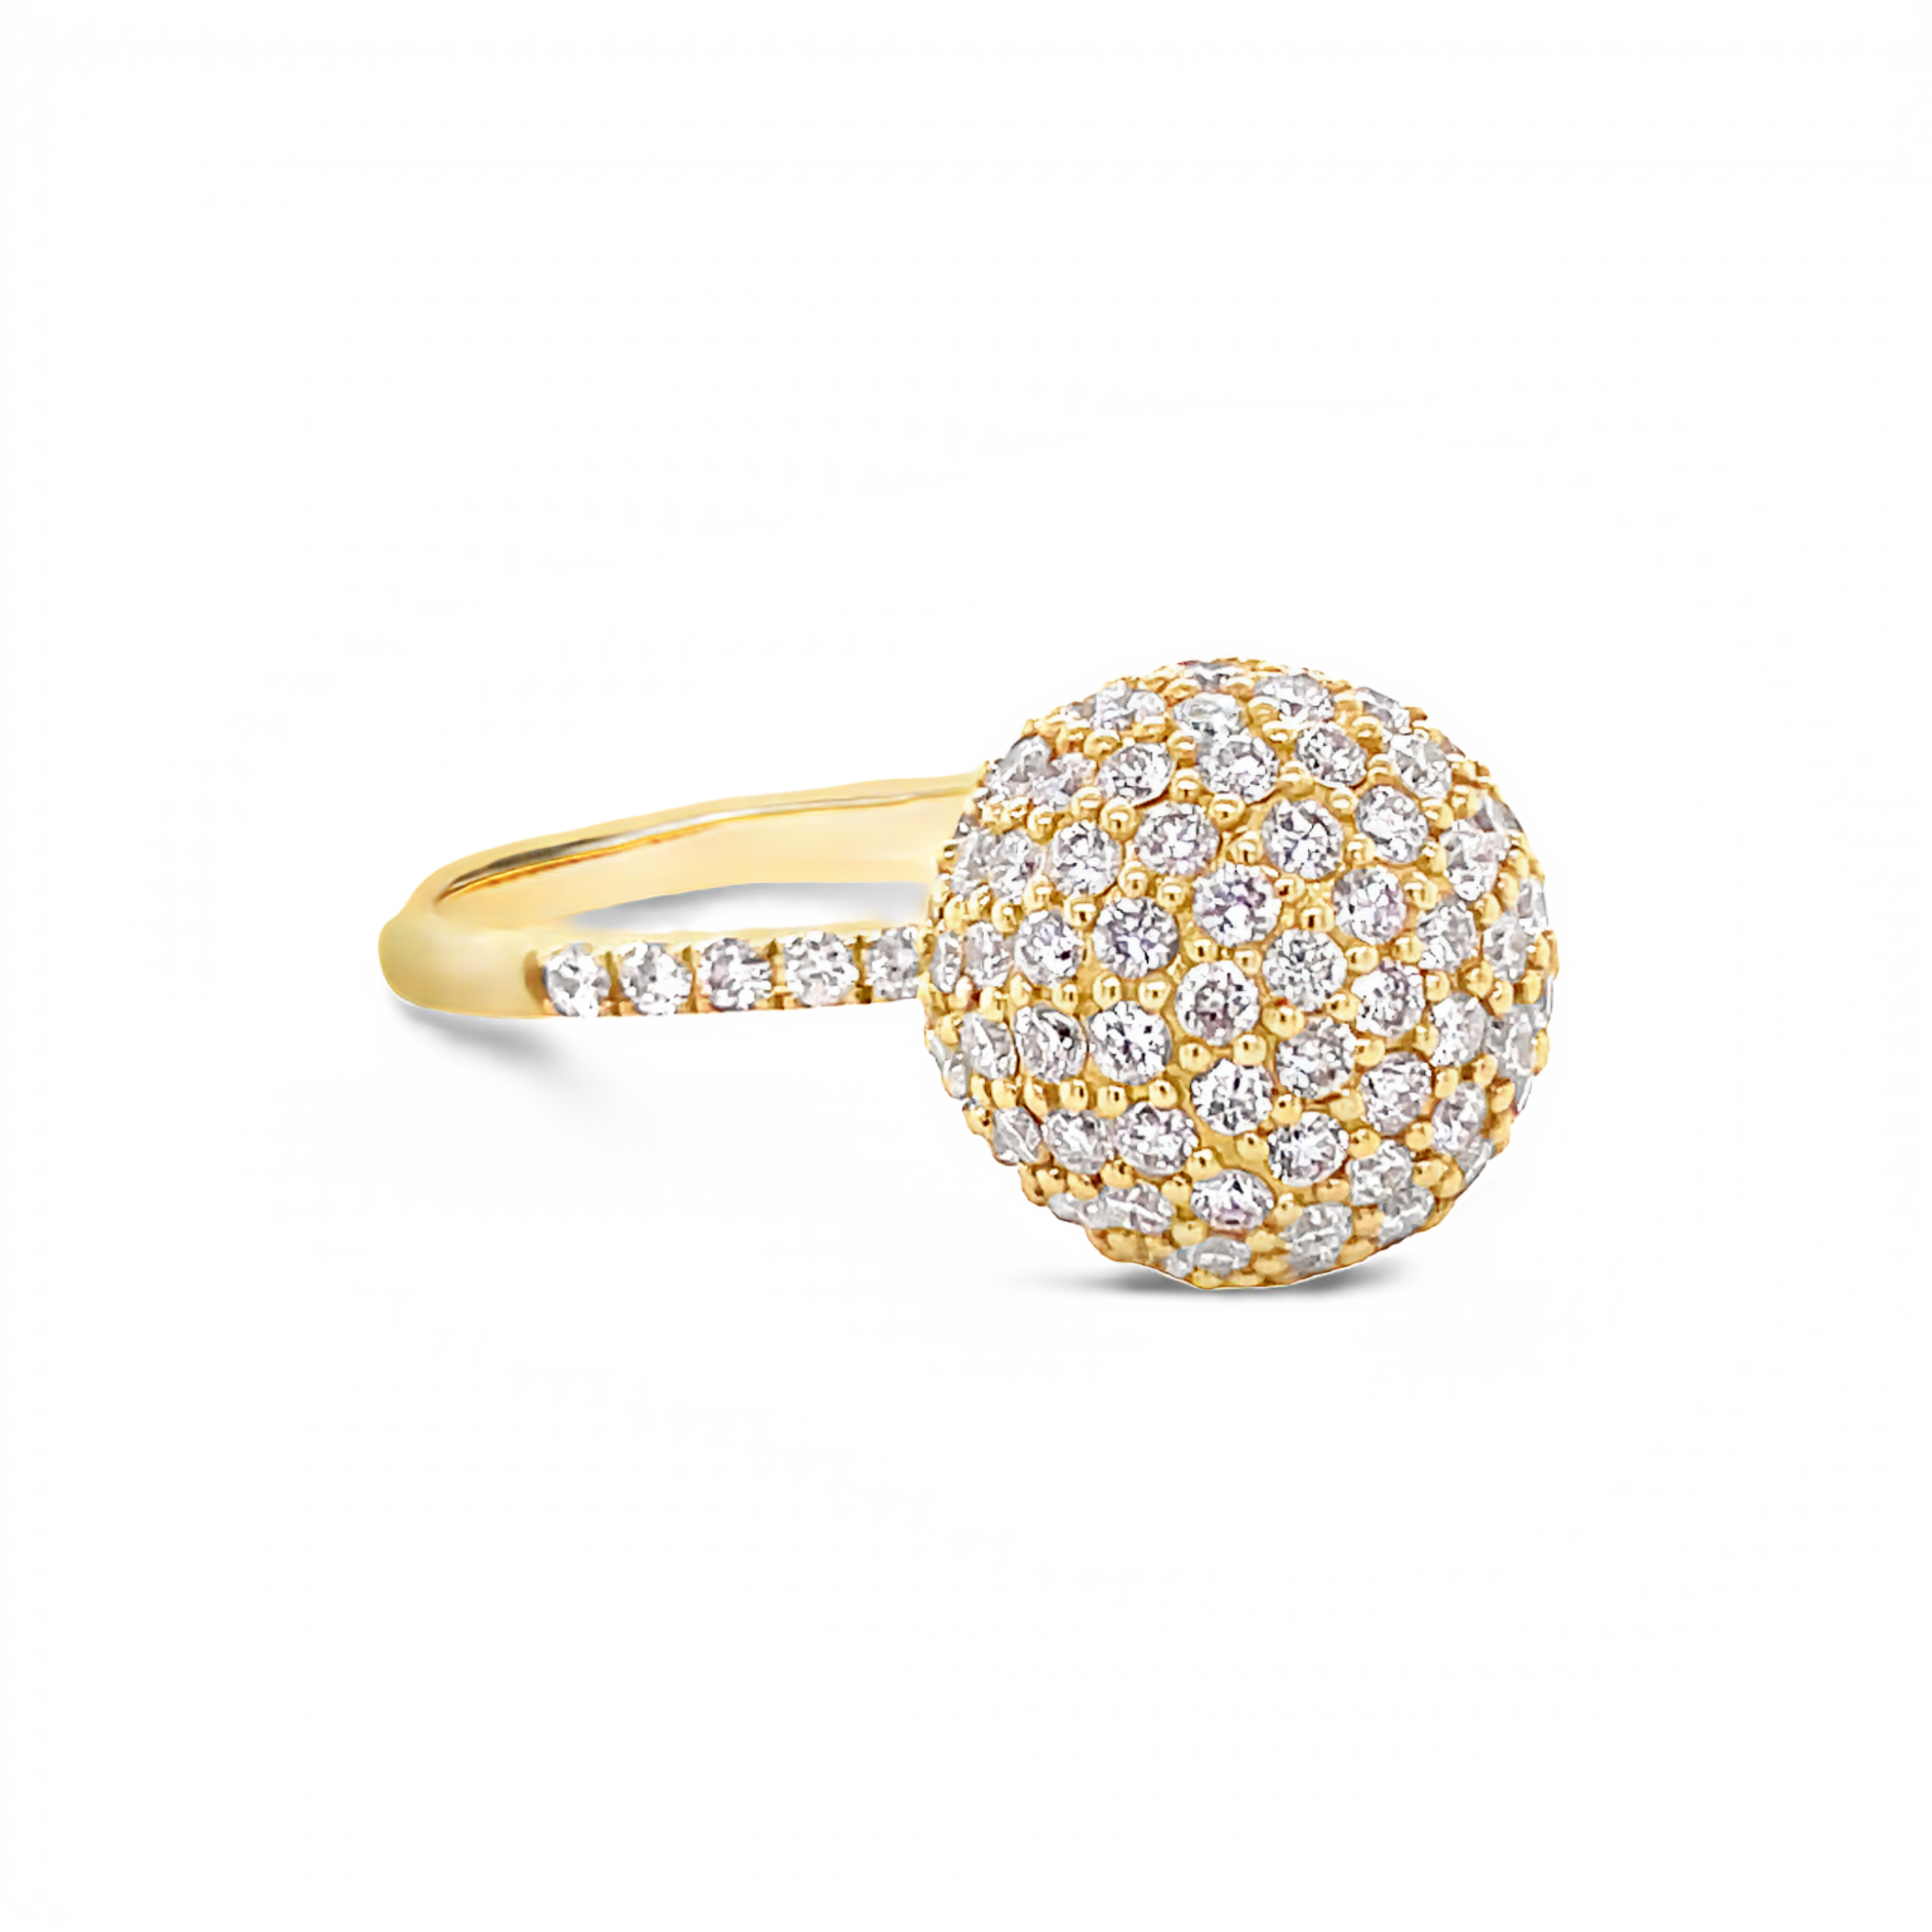 14k yellow gold  7.0 size (sizable)  Round diamonds 1.47 cts    11.00 mm  Diamonds in shank